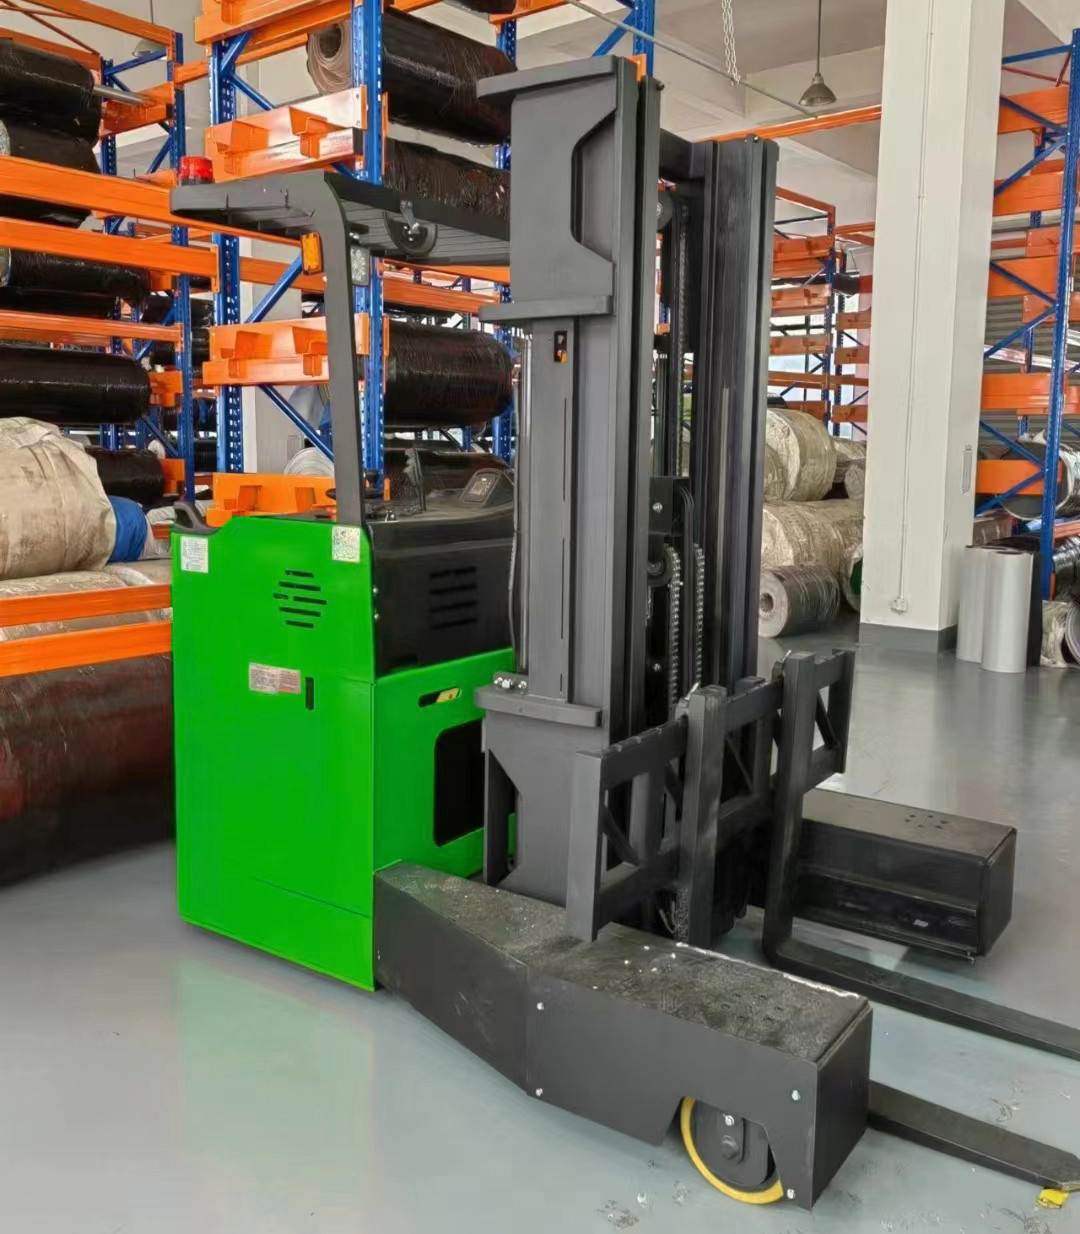 Application of 4-directional Reach Truck